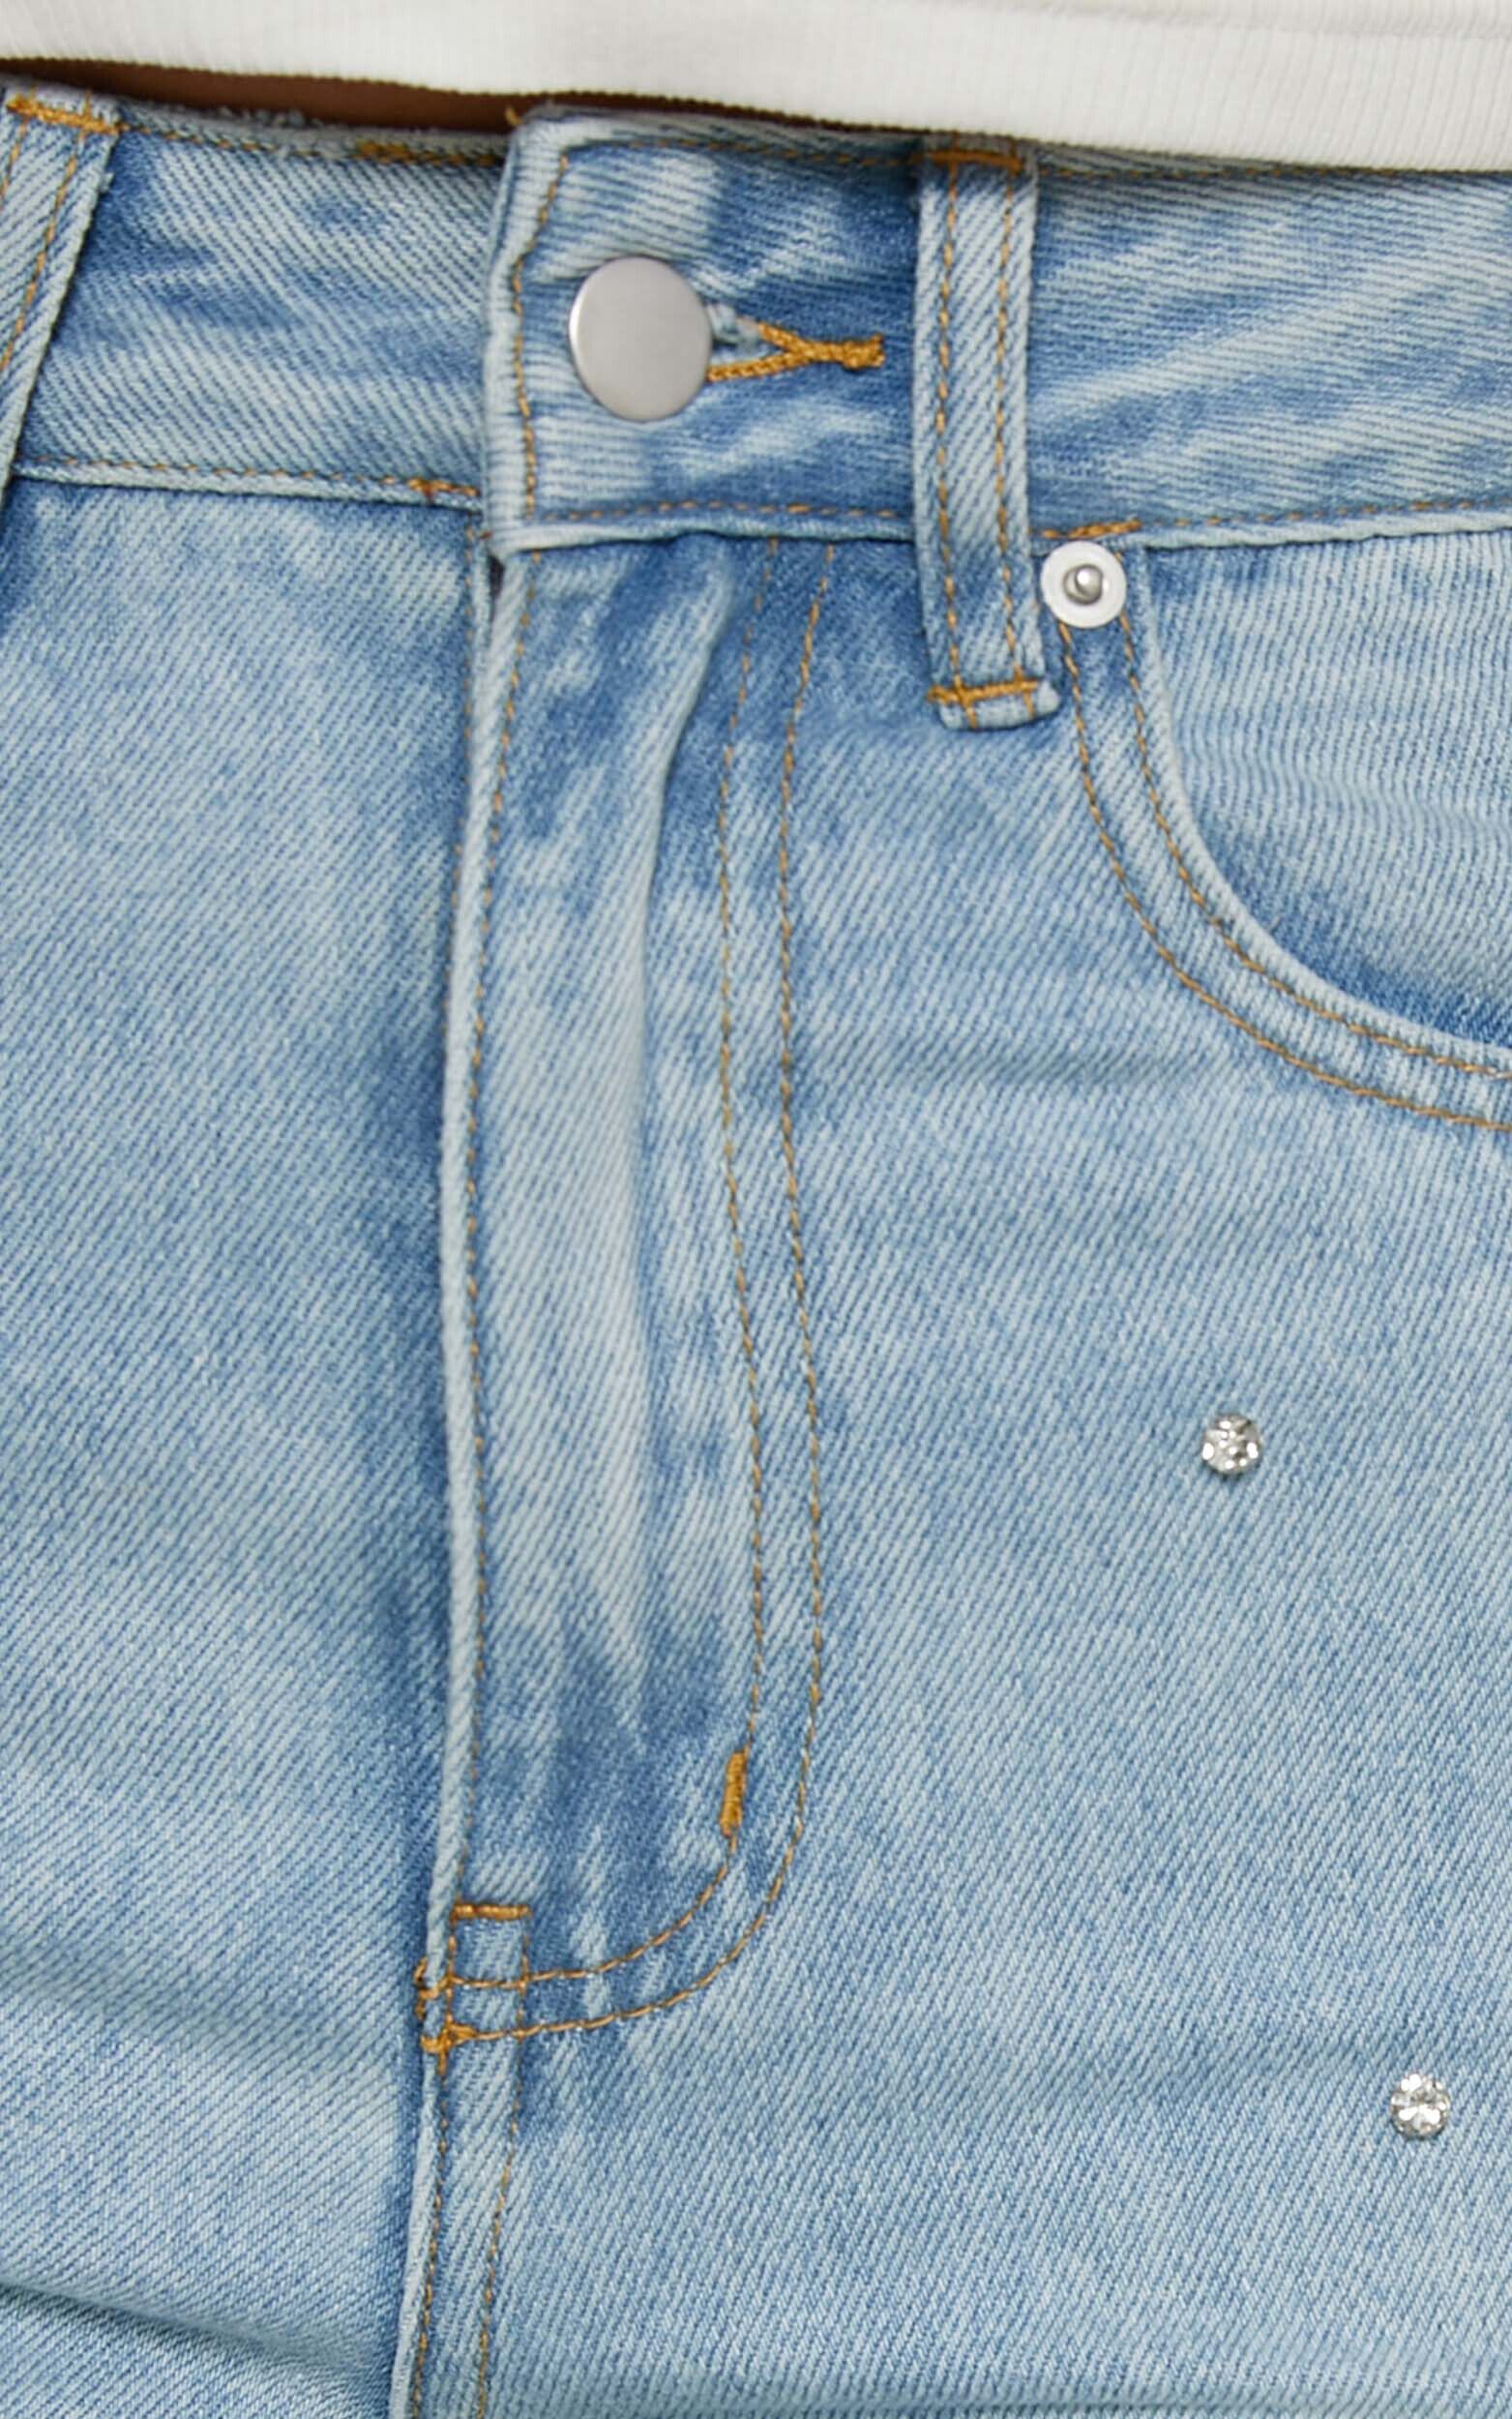 Cato Scattered Rhinestone Jeans - Blue